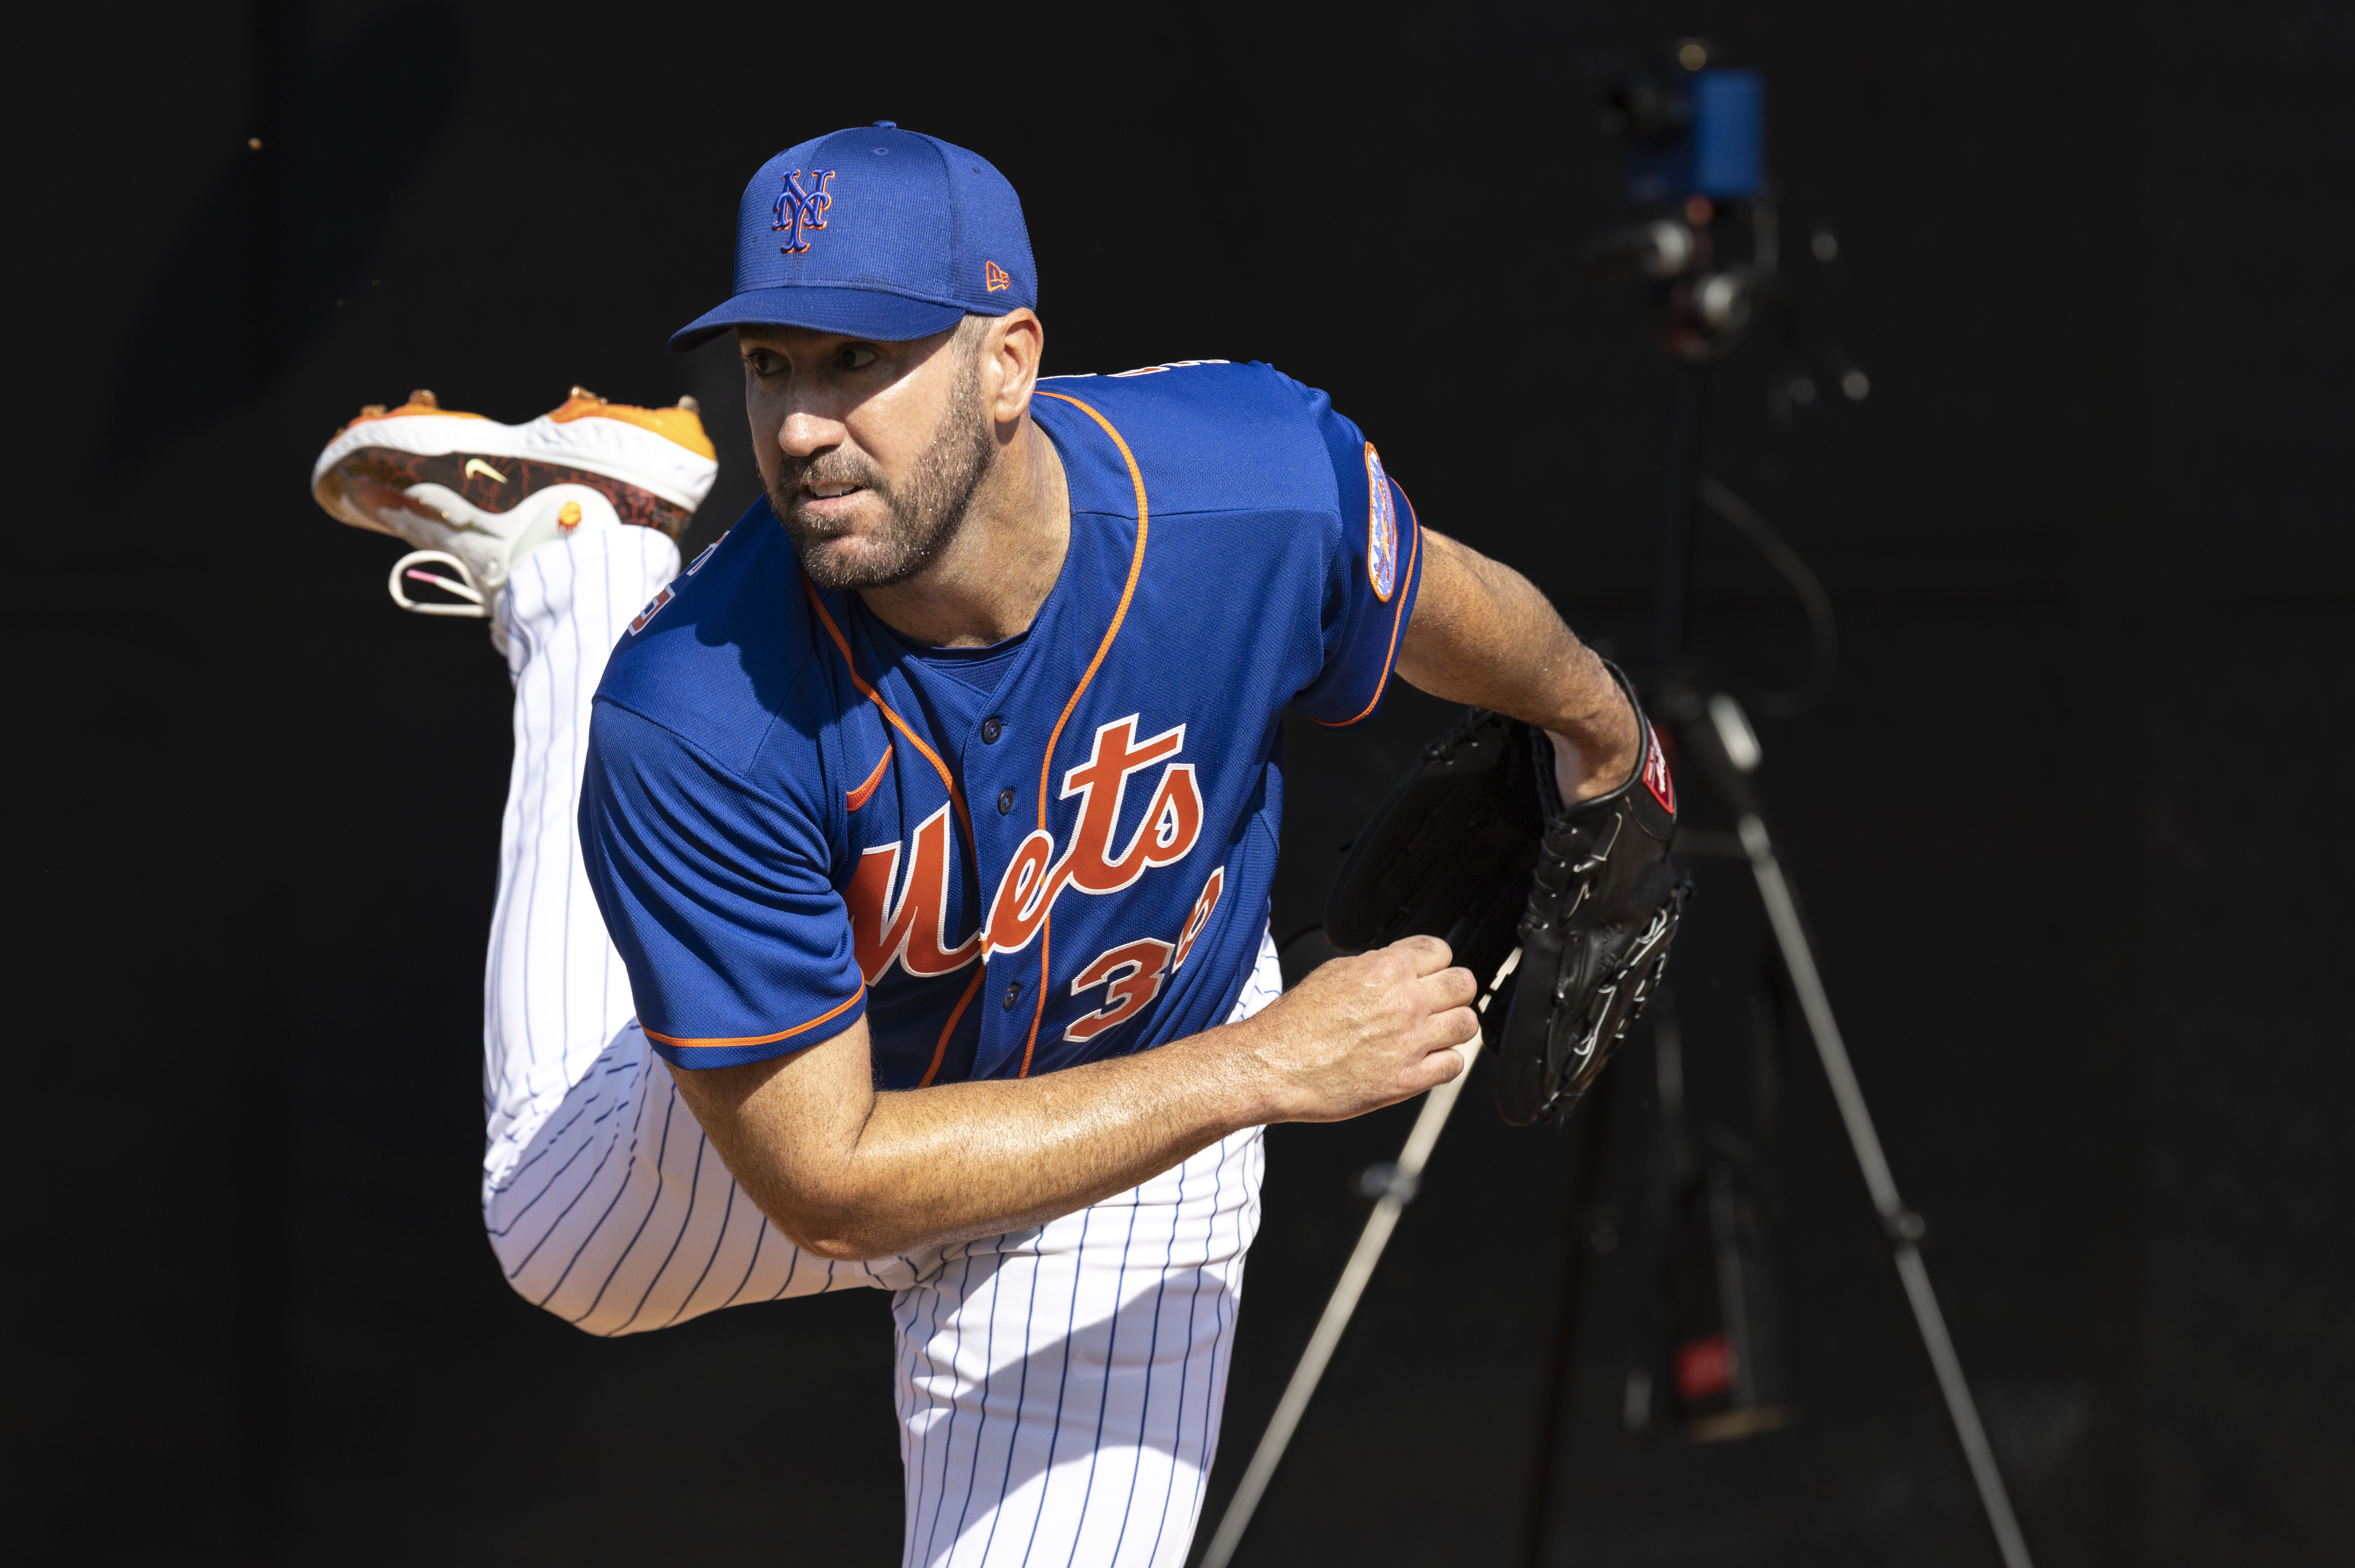 Justin Verlander throws a pitch in a blue uniform at Mets spring training